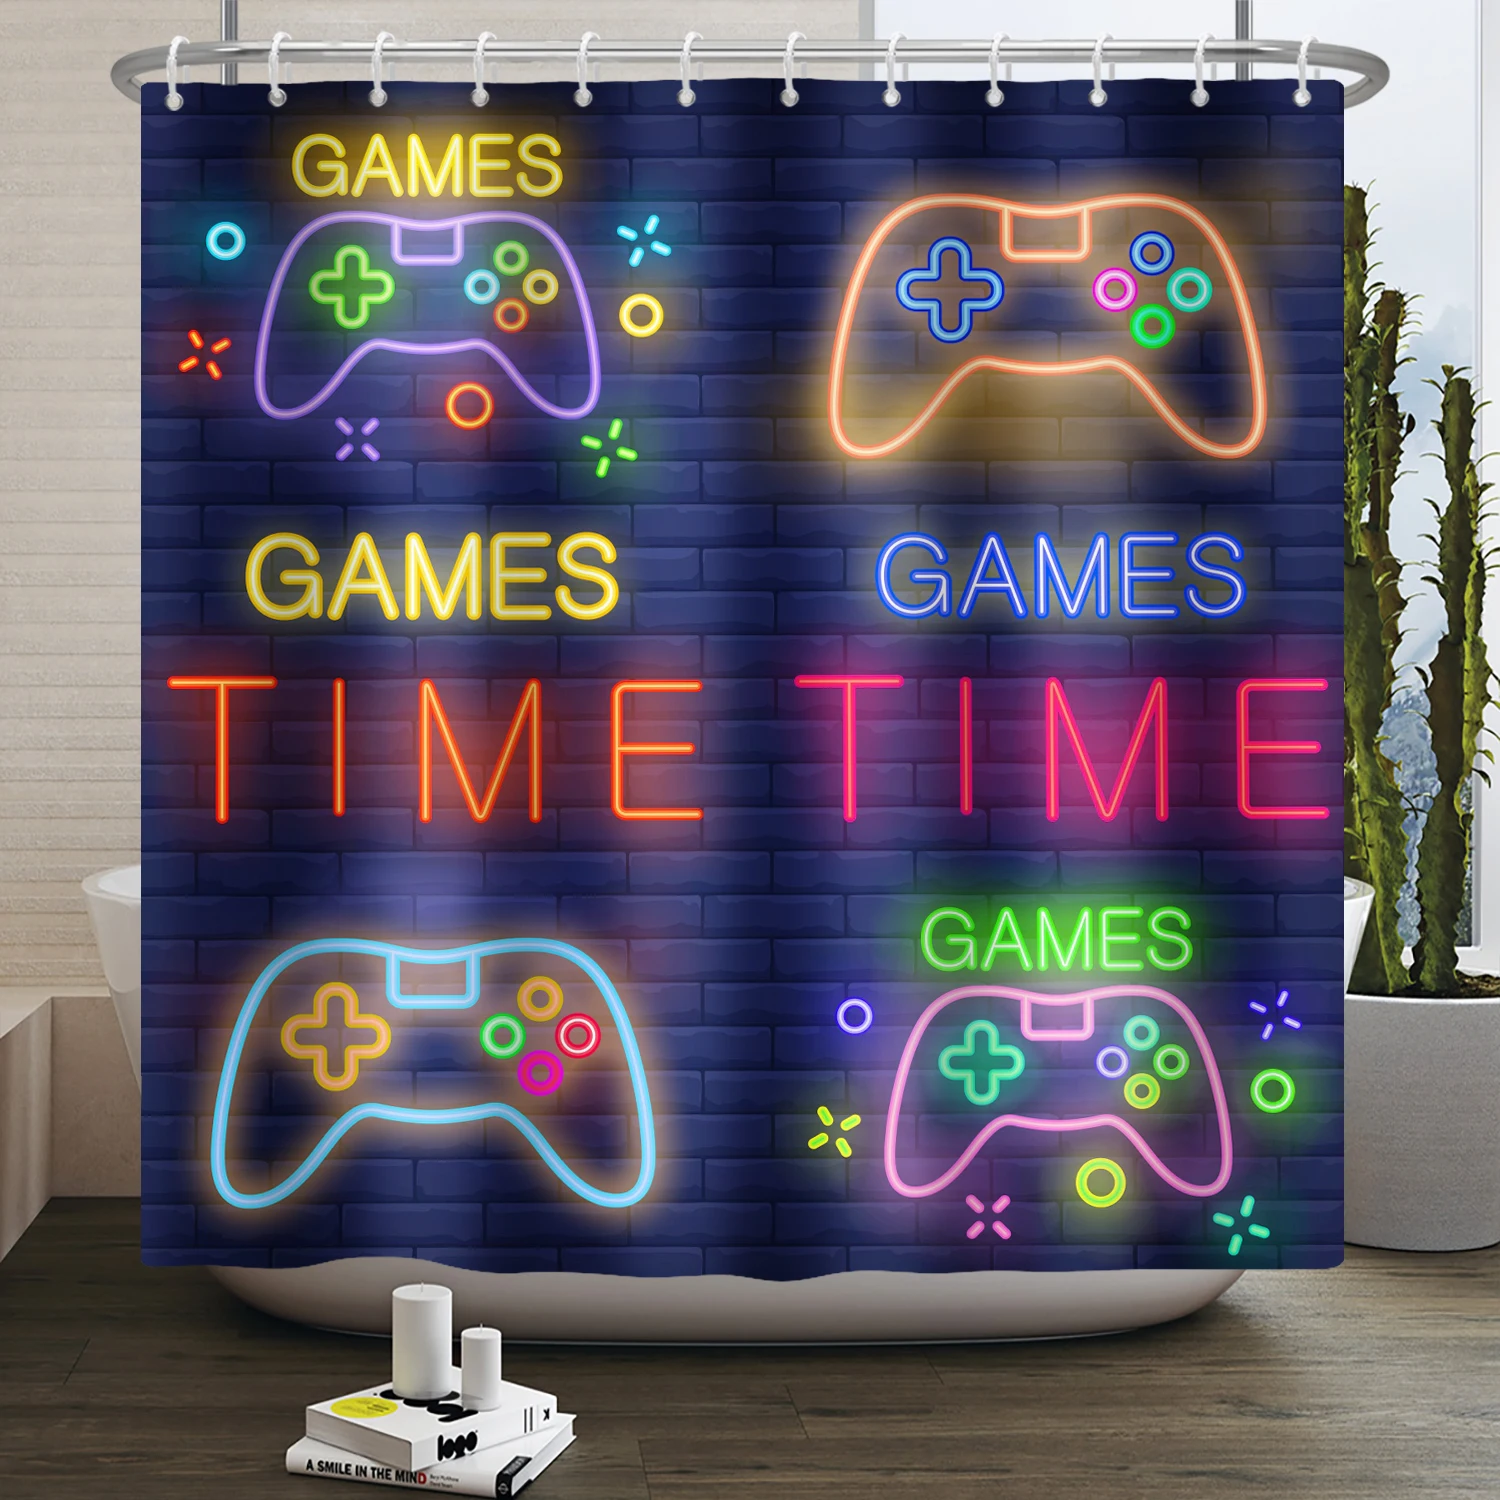 Games Time Shower Curtains Waterproof Bath Curtain for Kids Boys Classic Videogames Controller Bathroom Home Decor with Hooks solar powered bt control smart blinds drive motor motorized chain roller voice control shade shutter drive motor work with alexa google home support time scene and group mode